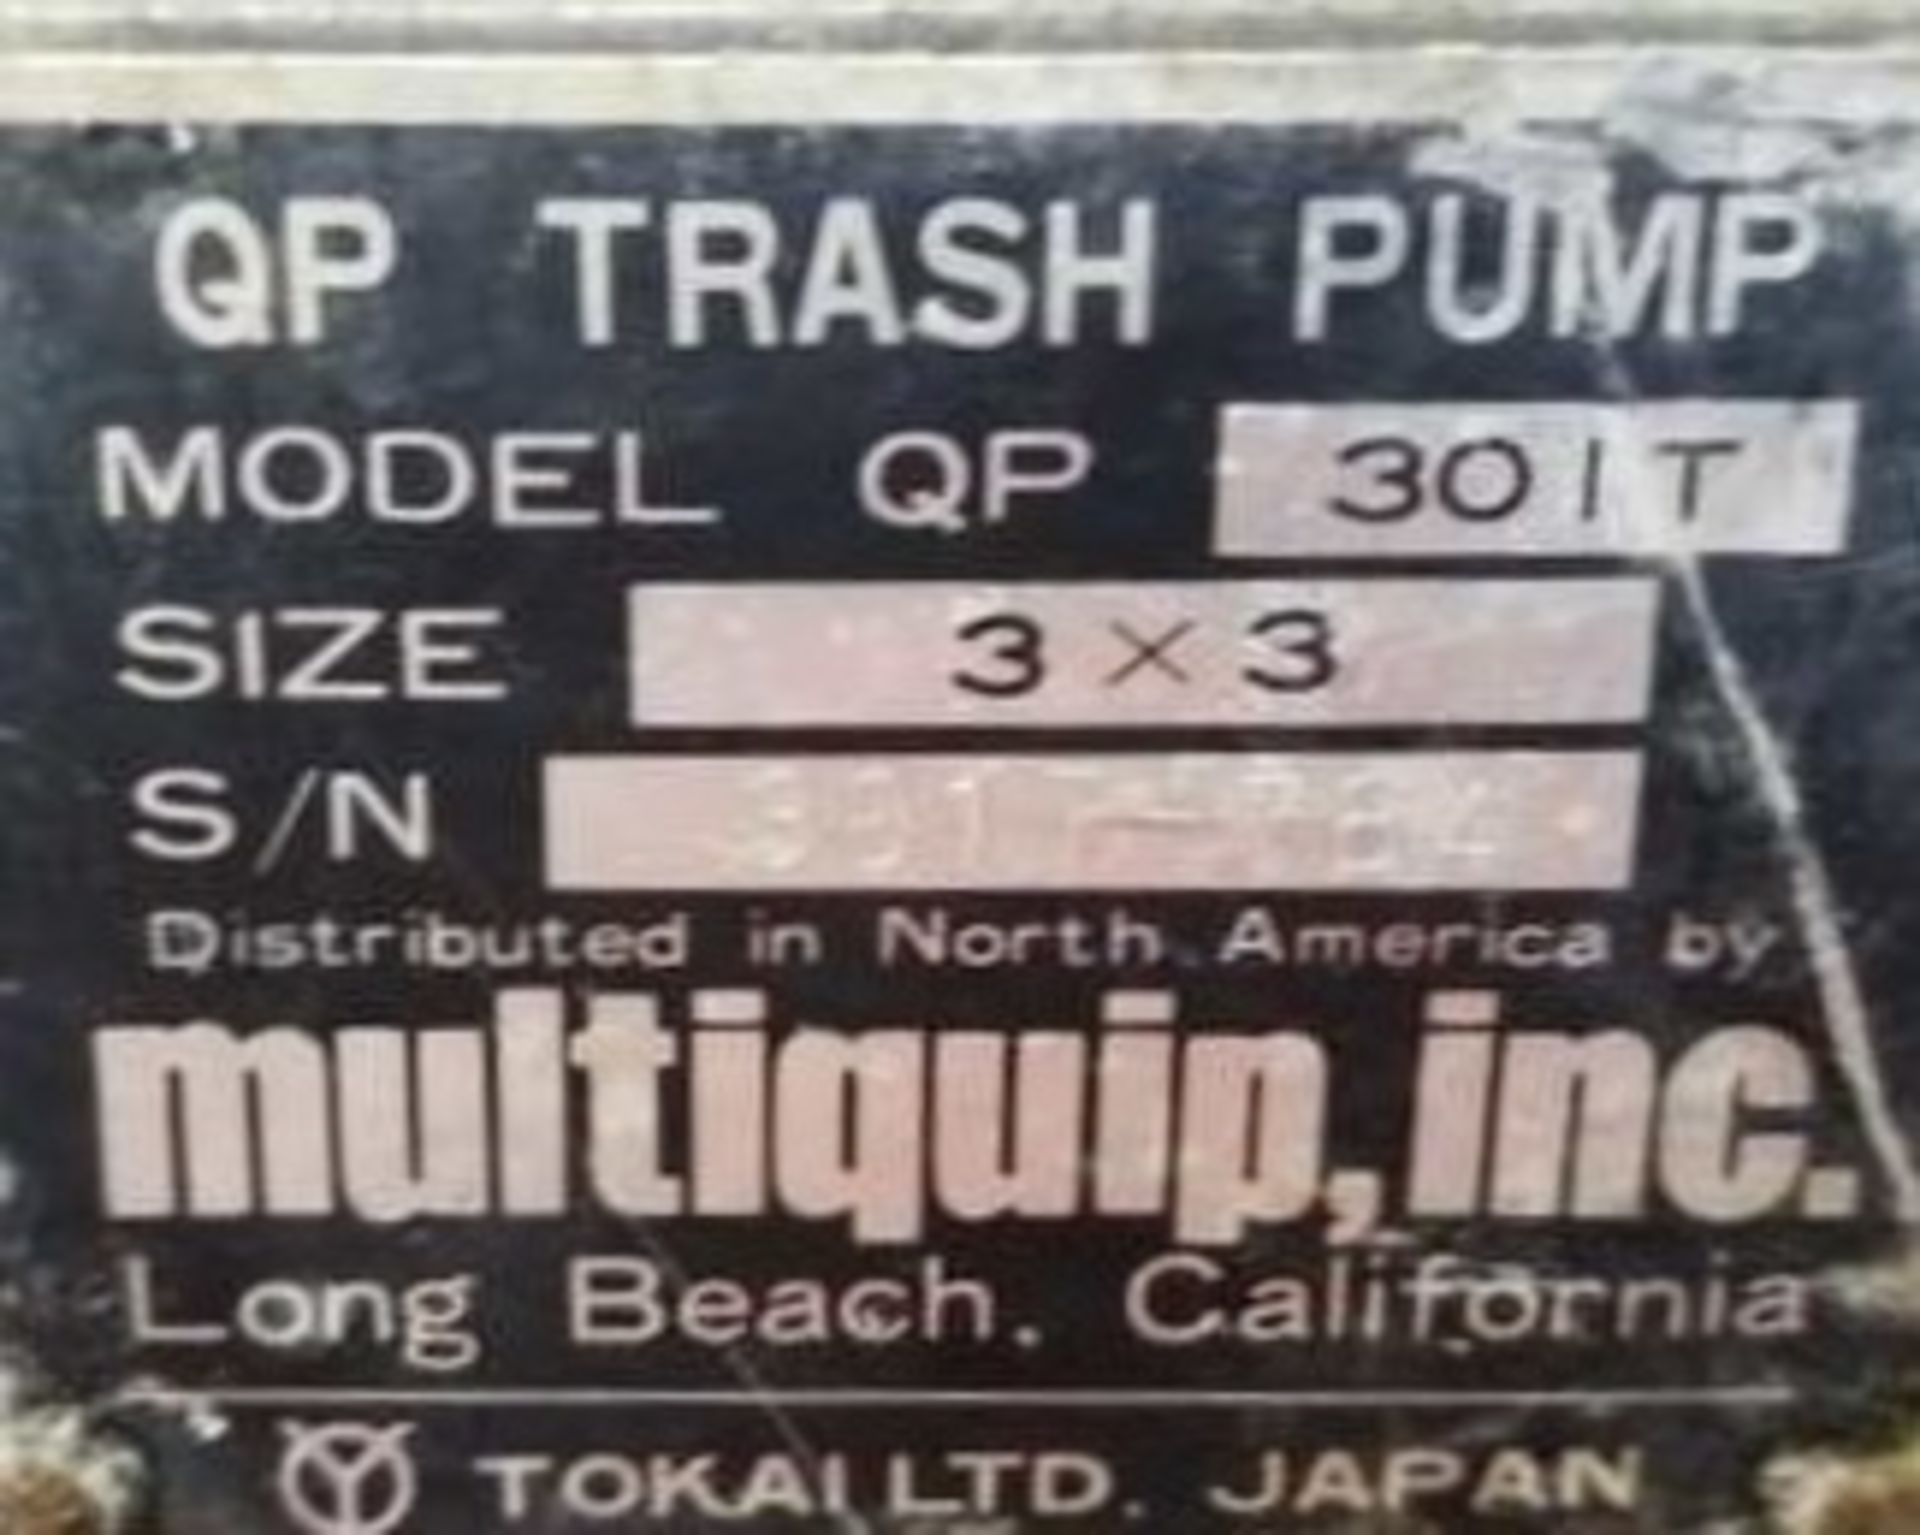 QP Trash Pump. 3" x 3". MDL: 301T. Gas motor driven. Manuf by Multiquip. Gas motor is a Wisconsin - Image 4 of 4